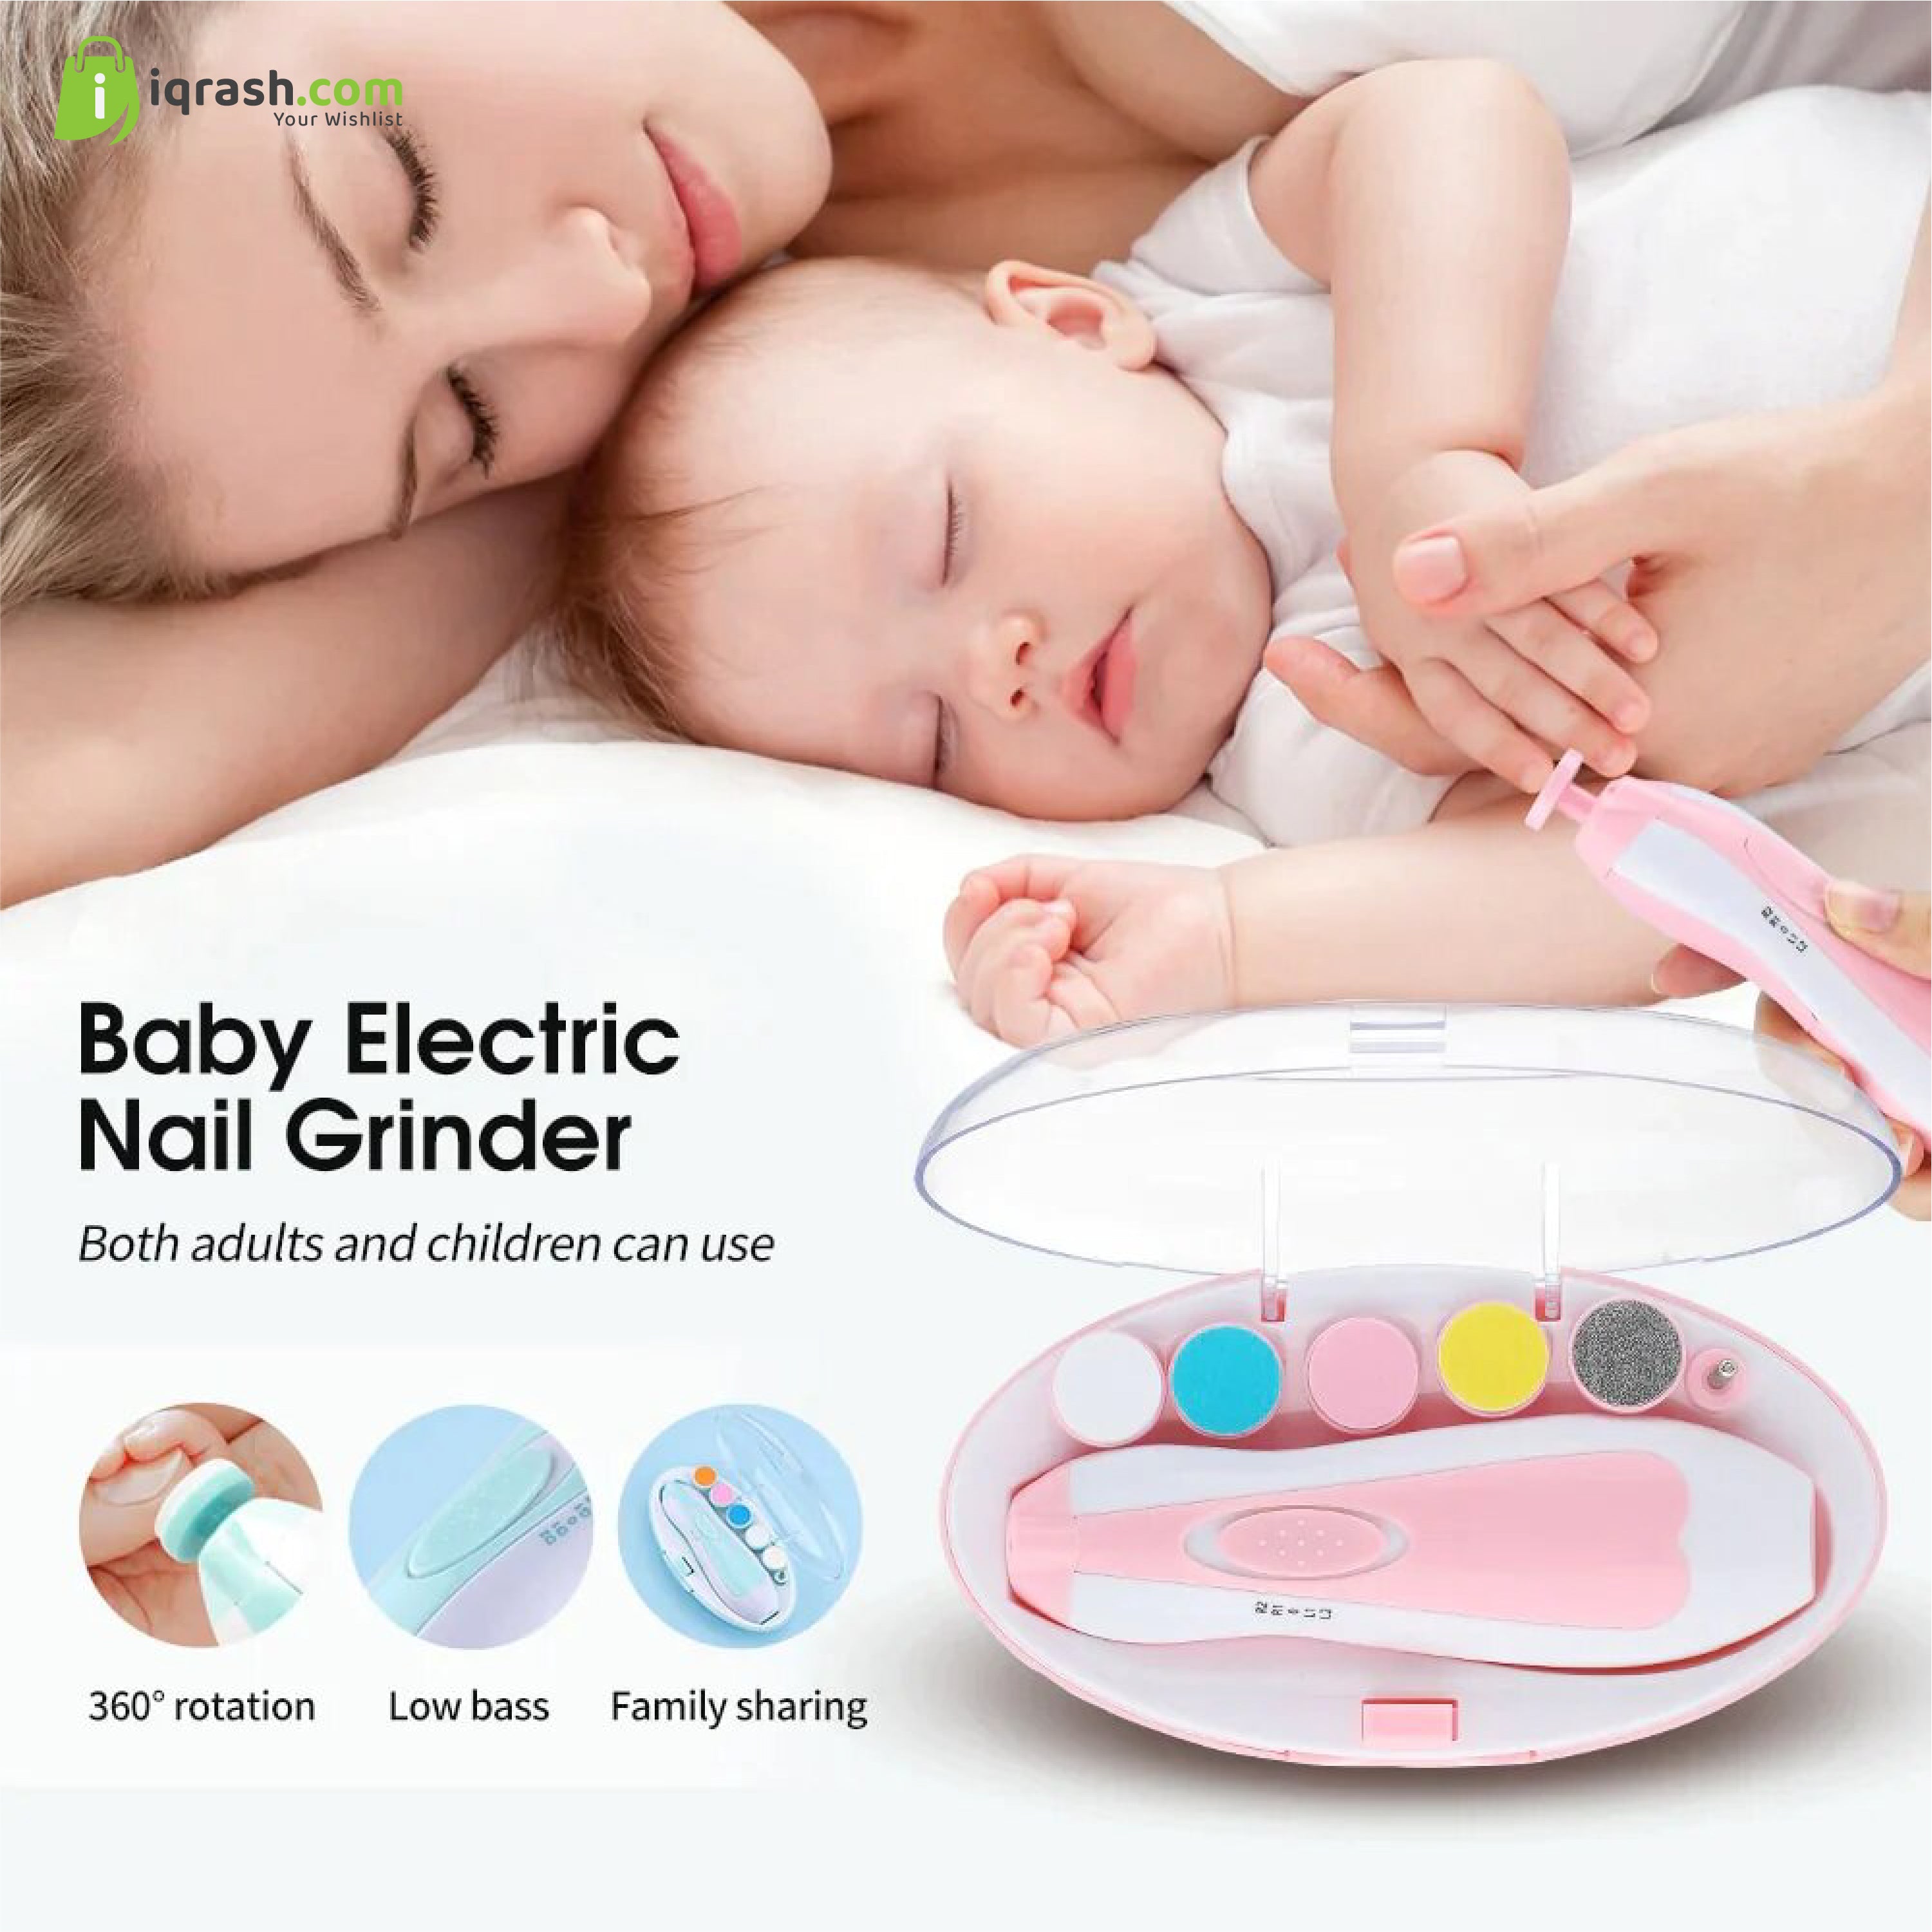 Amazon.com: Baby Nail Trimmer Electric Nail File Baby Nail Clippers, 20 in  1 Safe Nail Filer Grinder Kit for Newborn Infant Toddler Kids or Adults  Toes Fingernails Care Trim Polish, Led Light